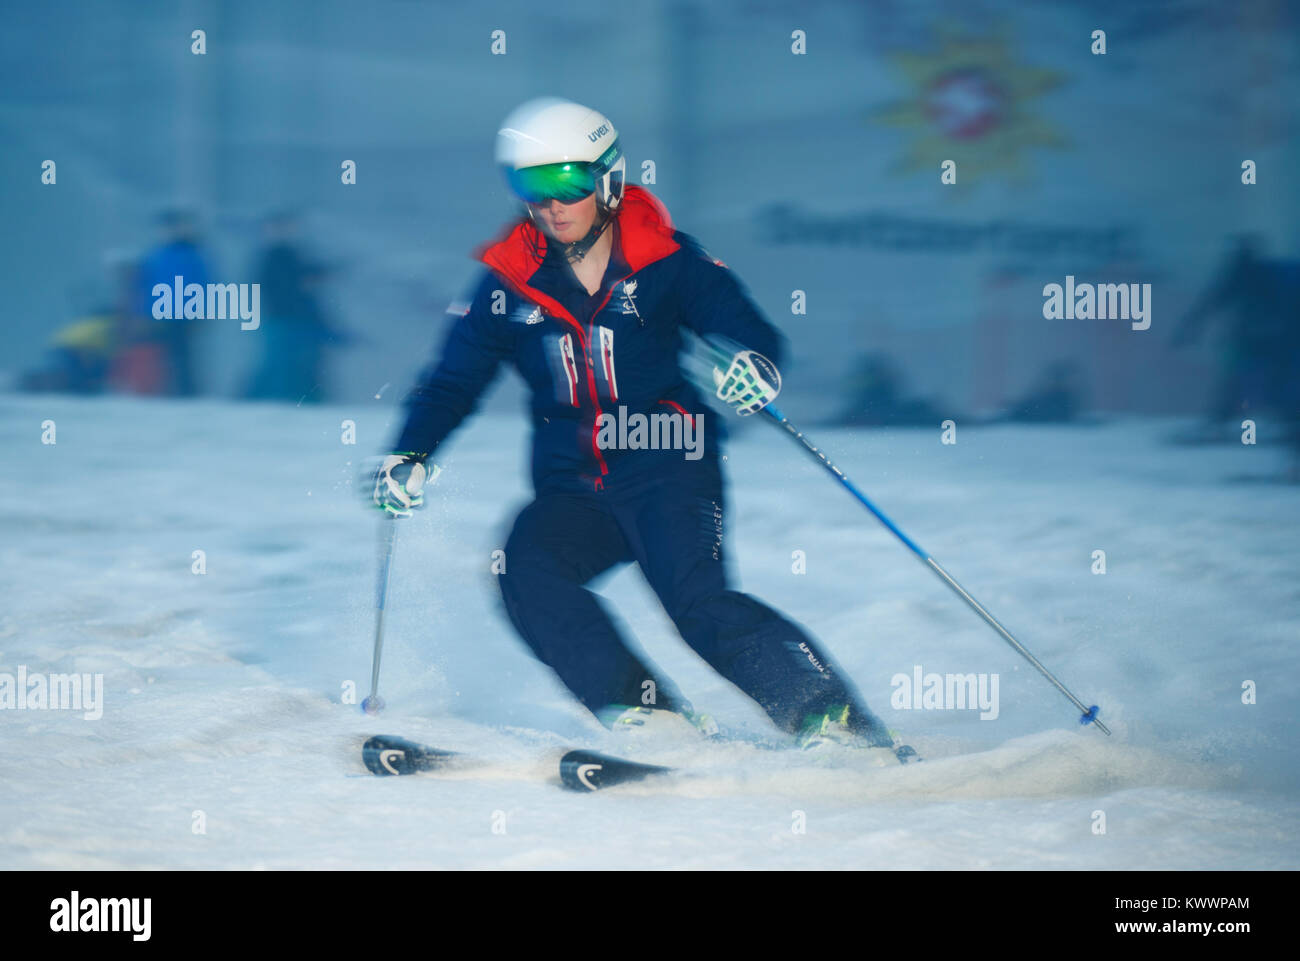 ParalympicsGB skier Millie Knight during the ParalympicsGB 2018 Winter Olympics Alpine Skiing and Snowboard team announcement, at The Snowcentre, Hemel Hempstead. Stock Photo